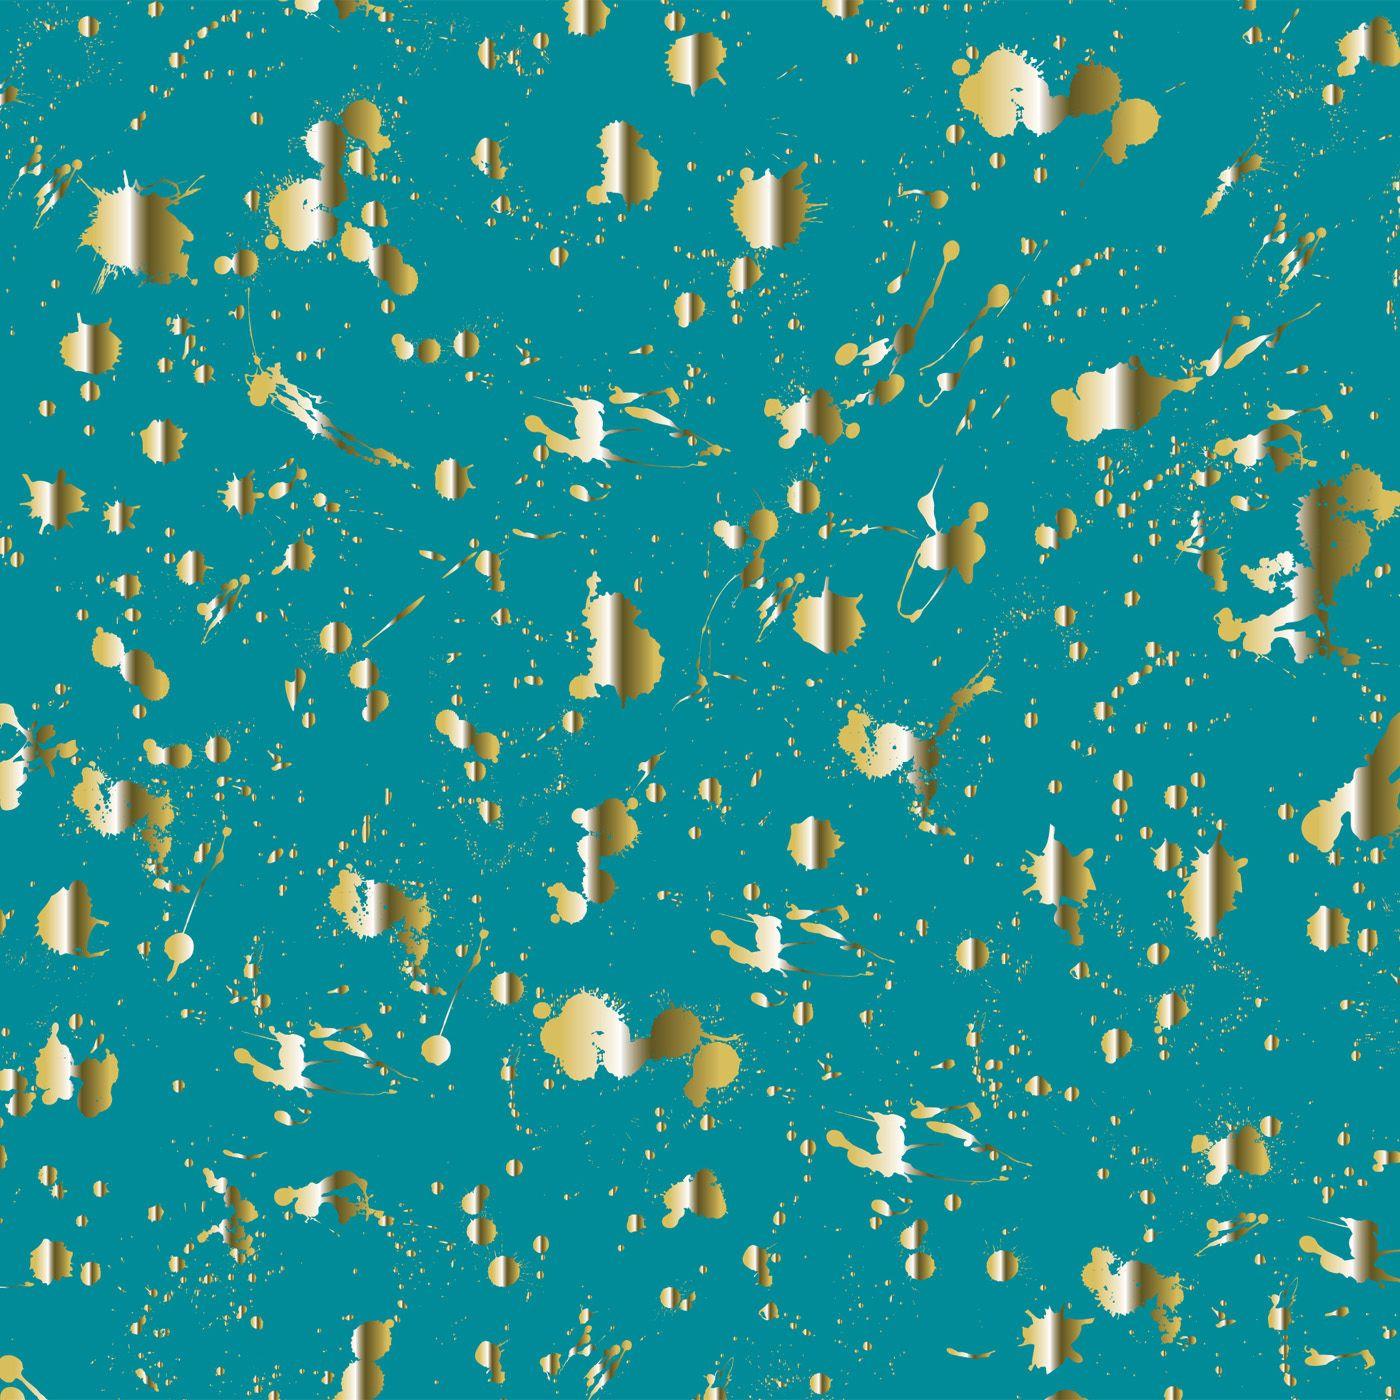 Drip Teal and Gold Wallpaper